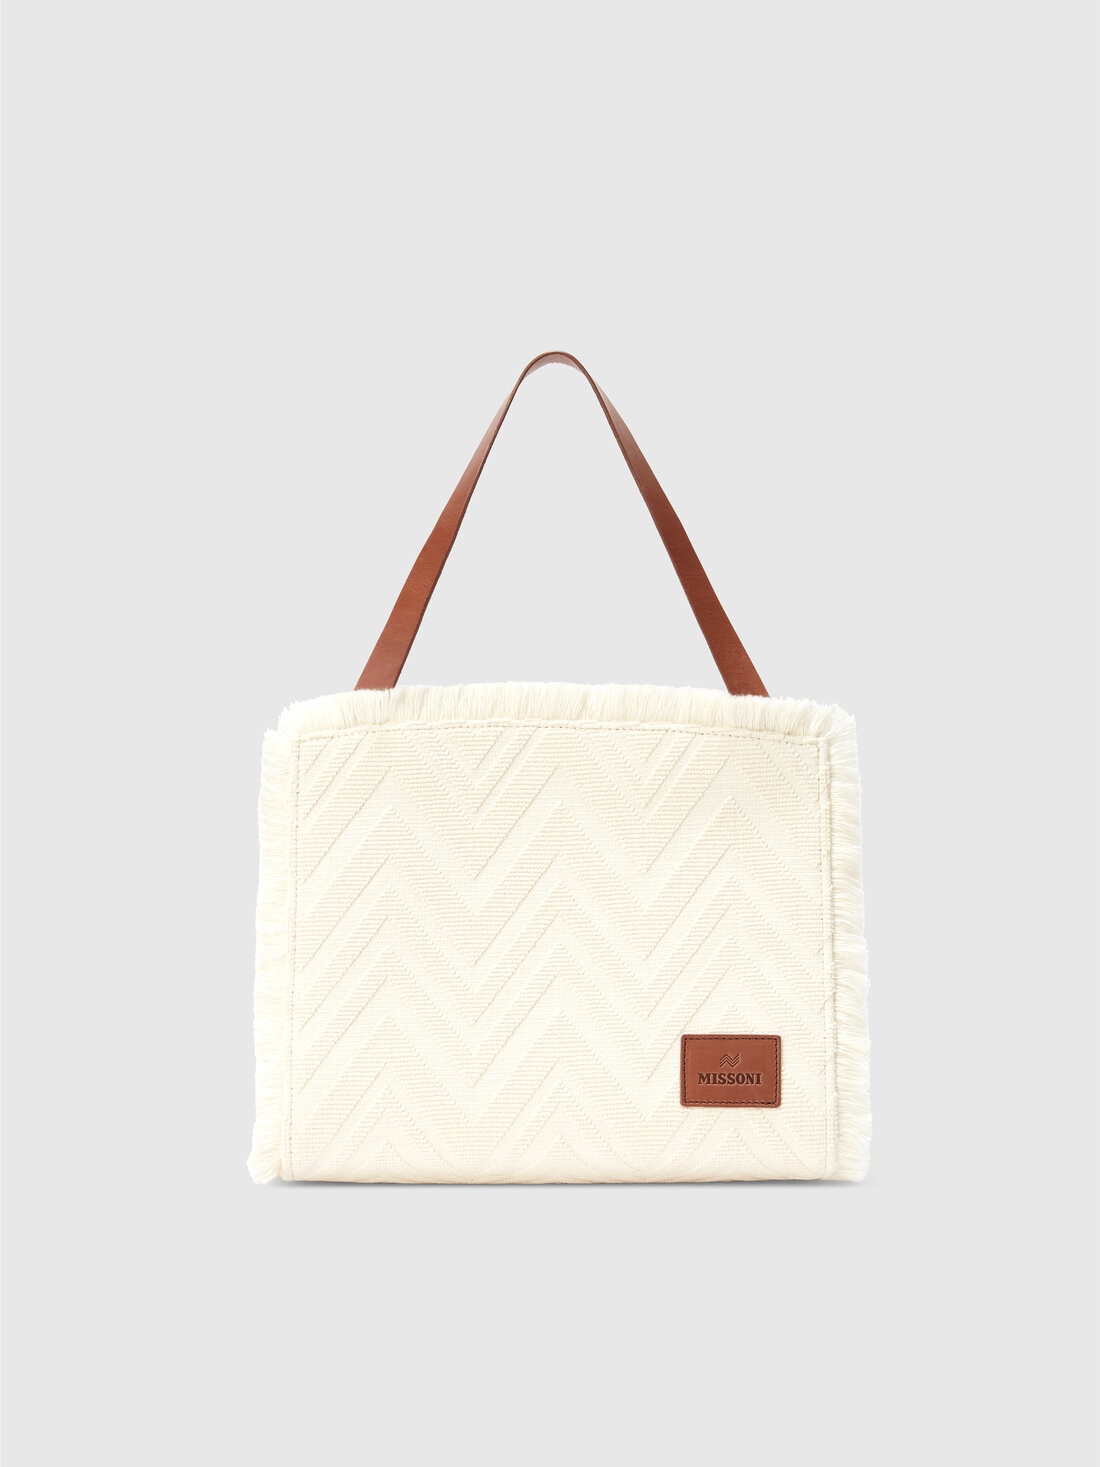 Tote bag in cotton blend with chevron pattern, Brown - 8053147143255 - 0